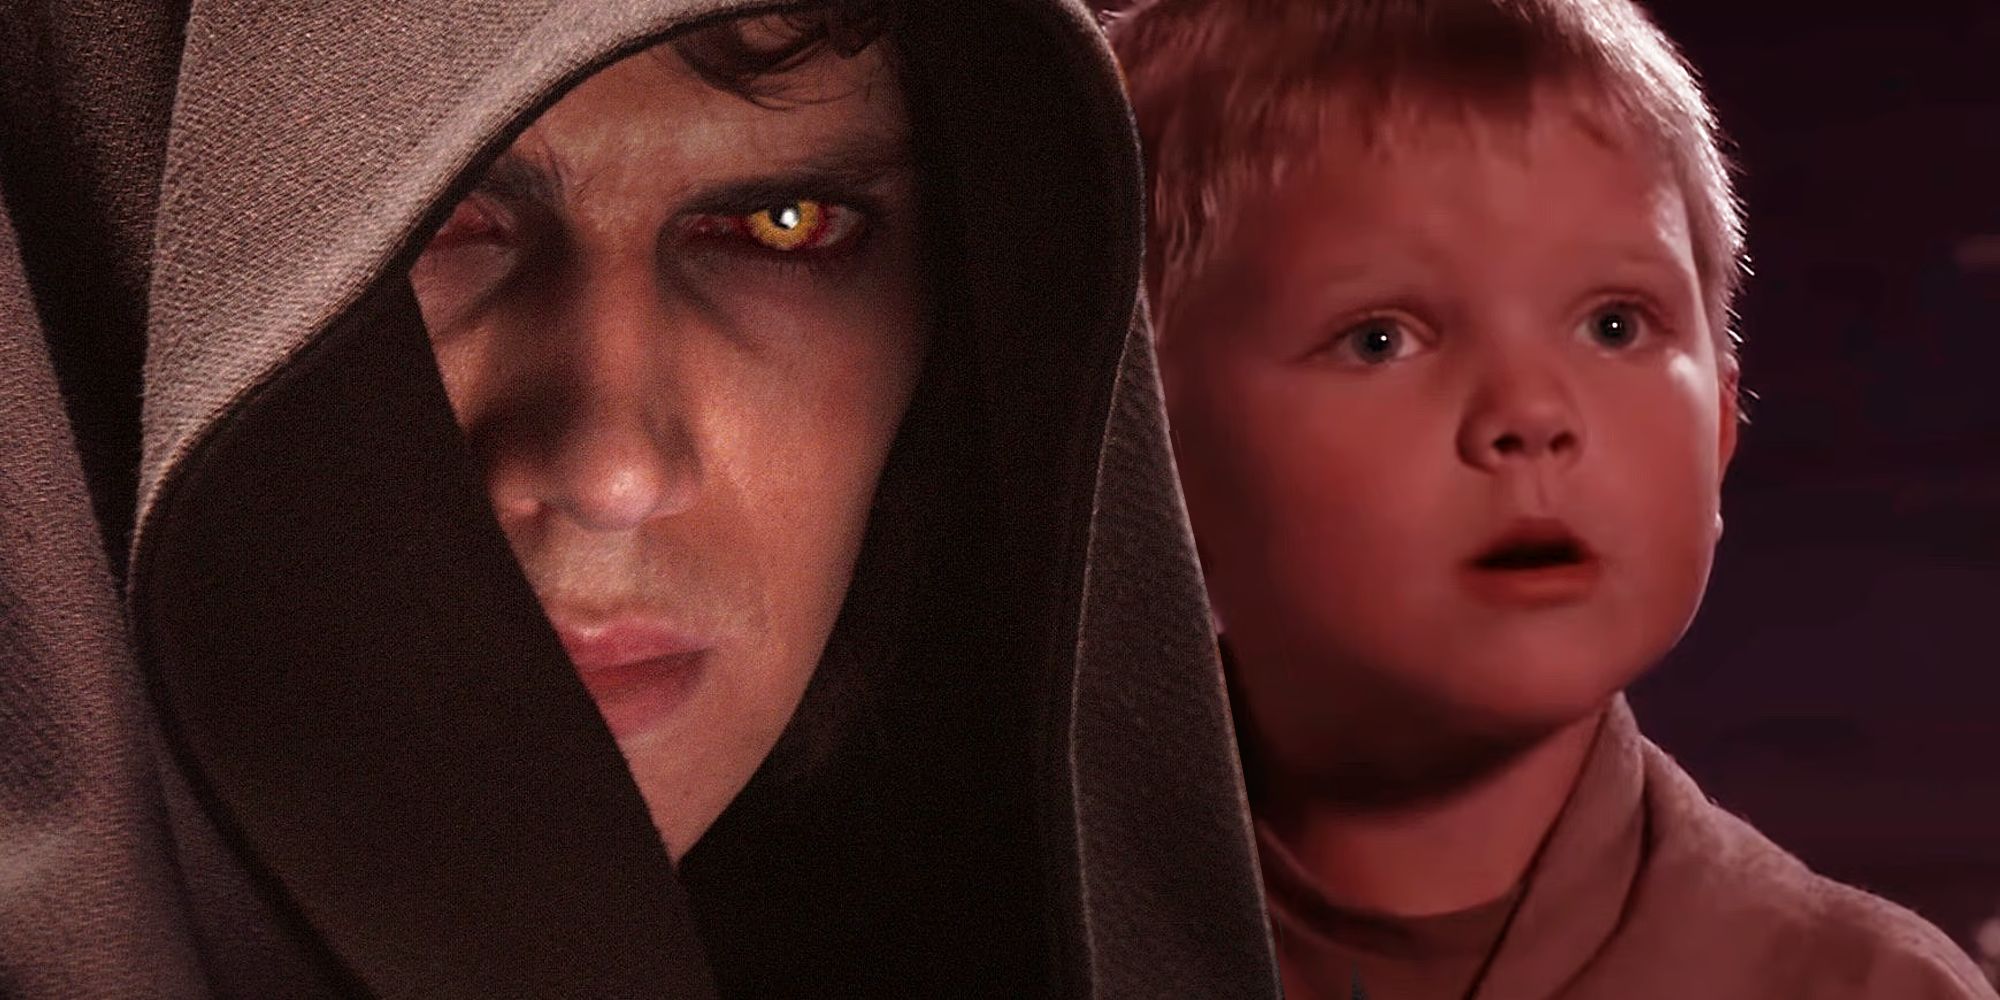 Anakin Skywalker from Revenge of the Sith with a Youngling victim's face